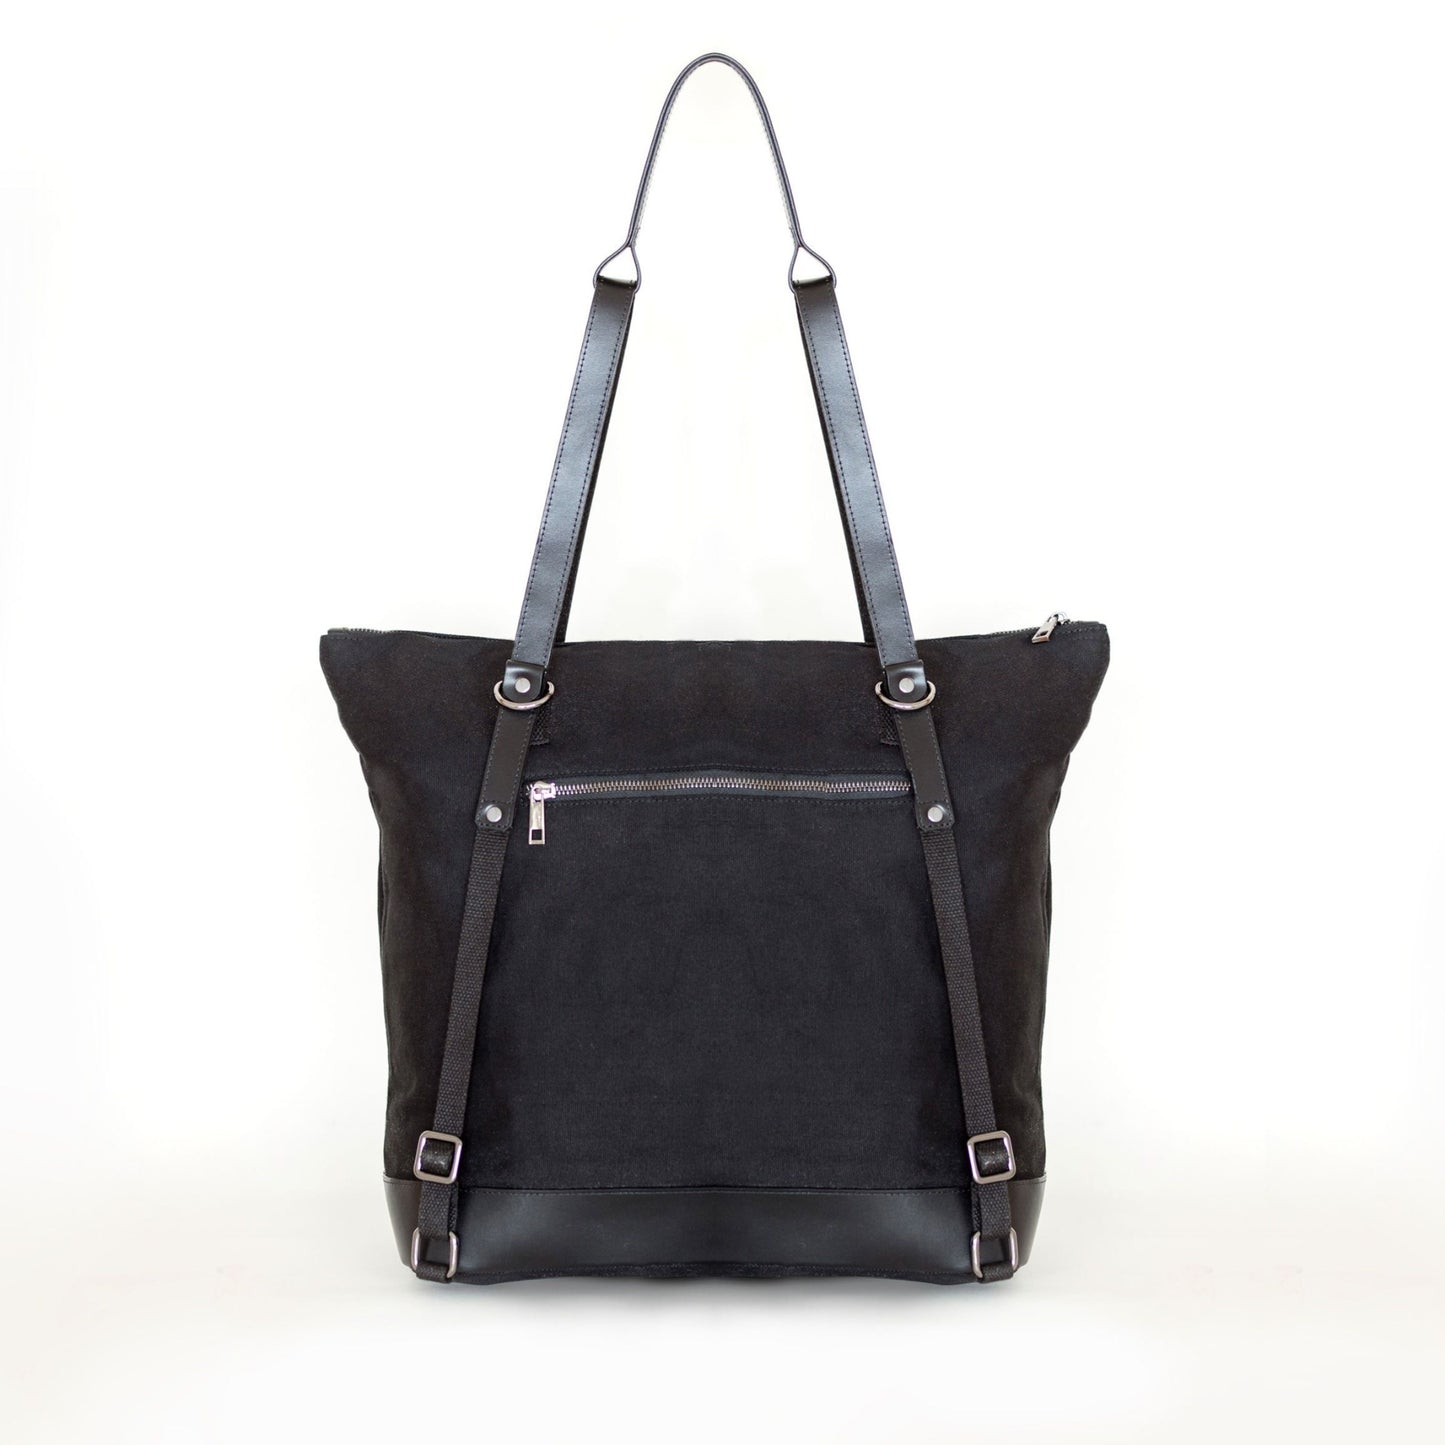 ARCH LUXE Nappy Bag - Black